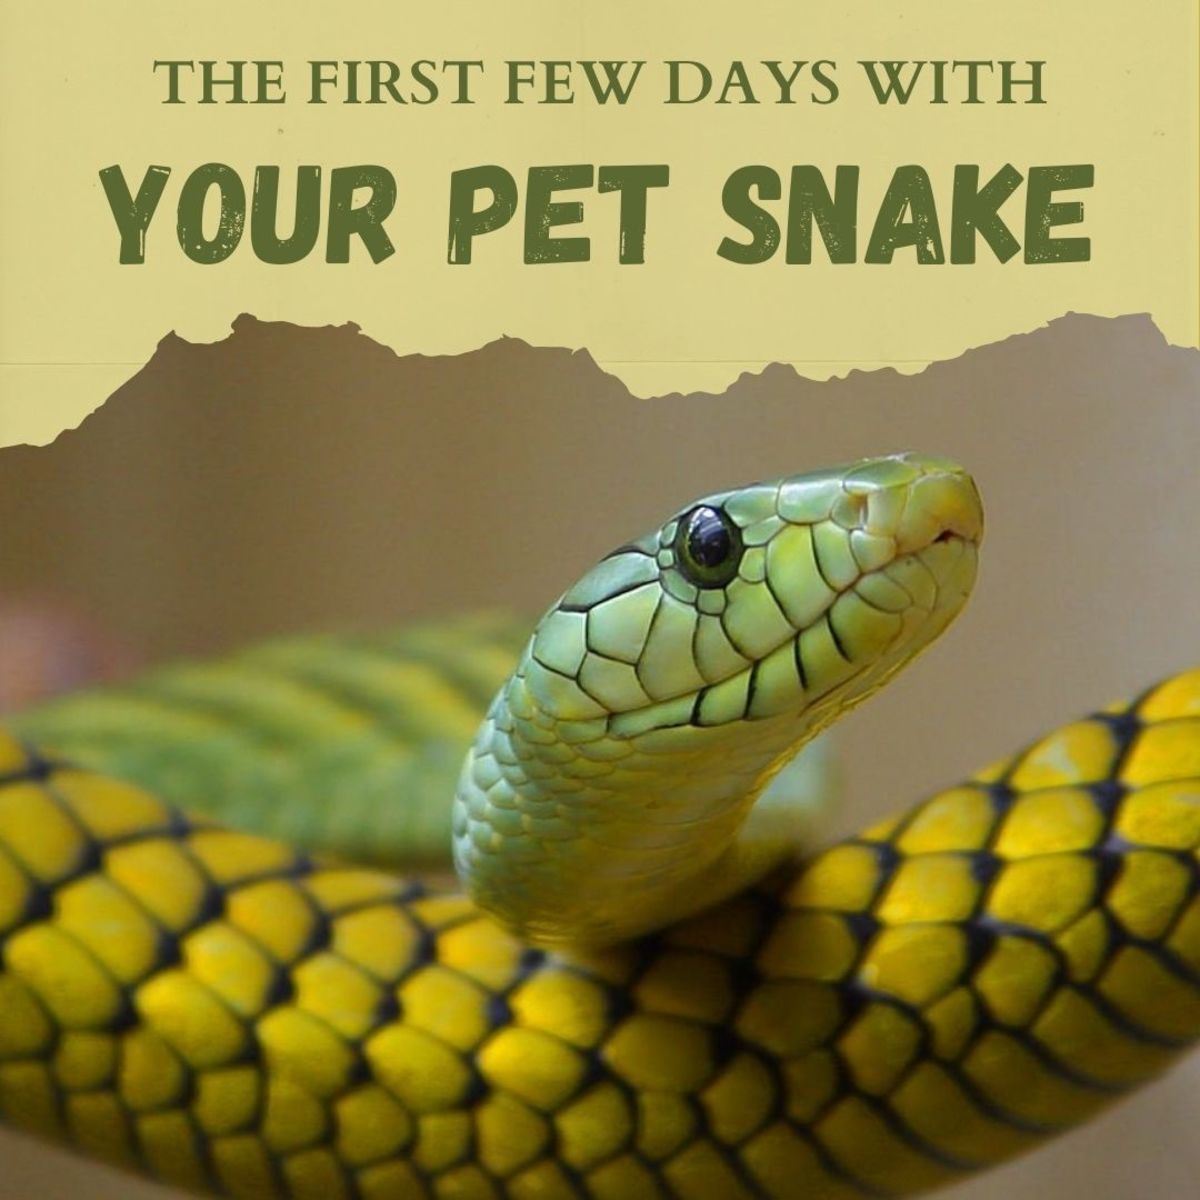 Learn what you should do in the first few days after you get your pet snake.